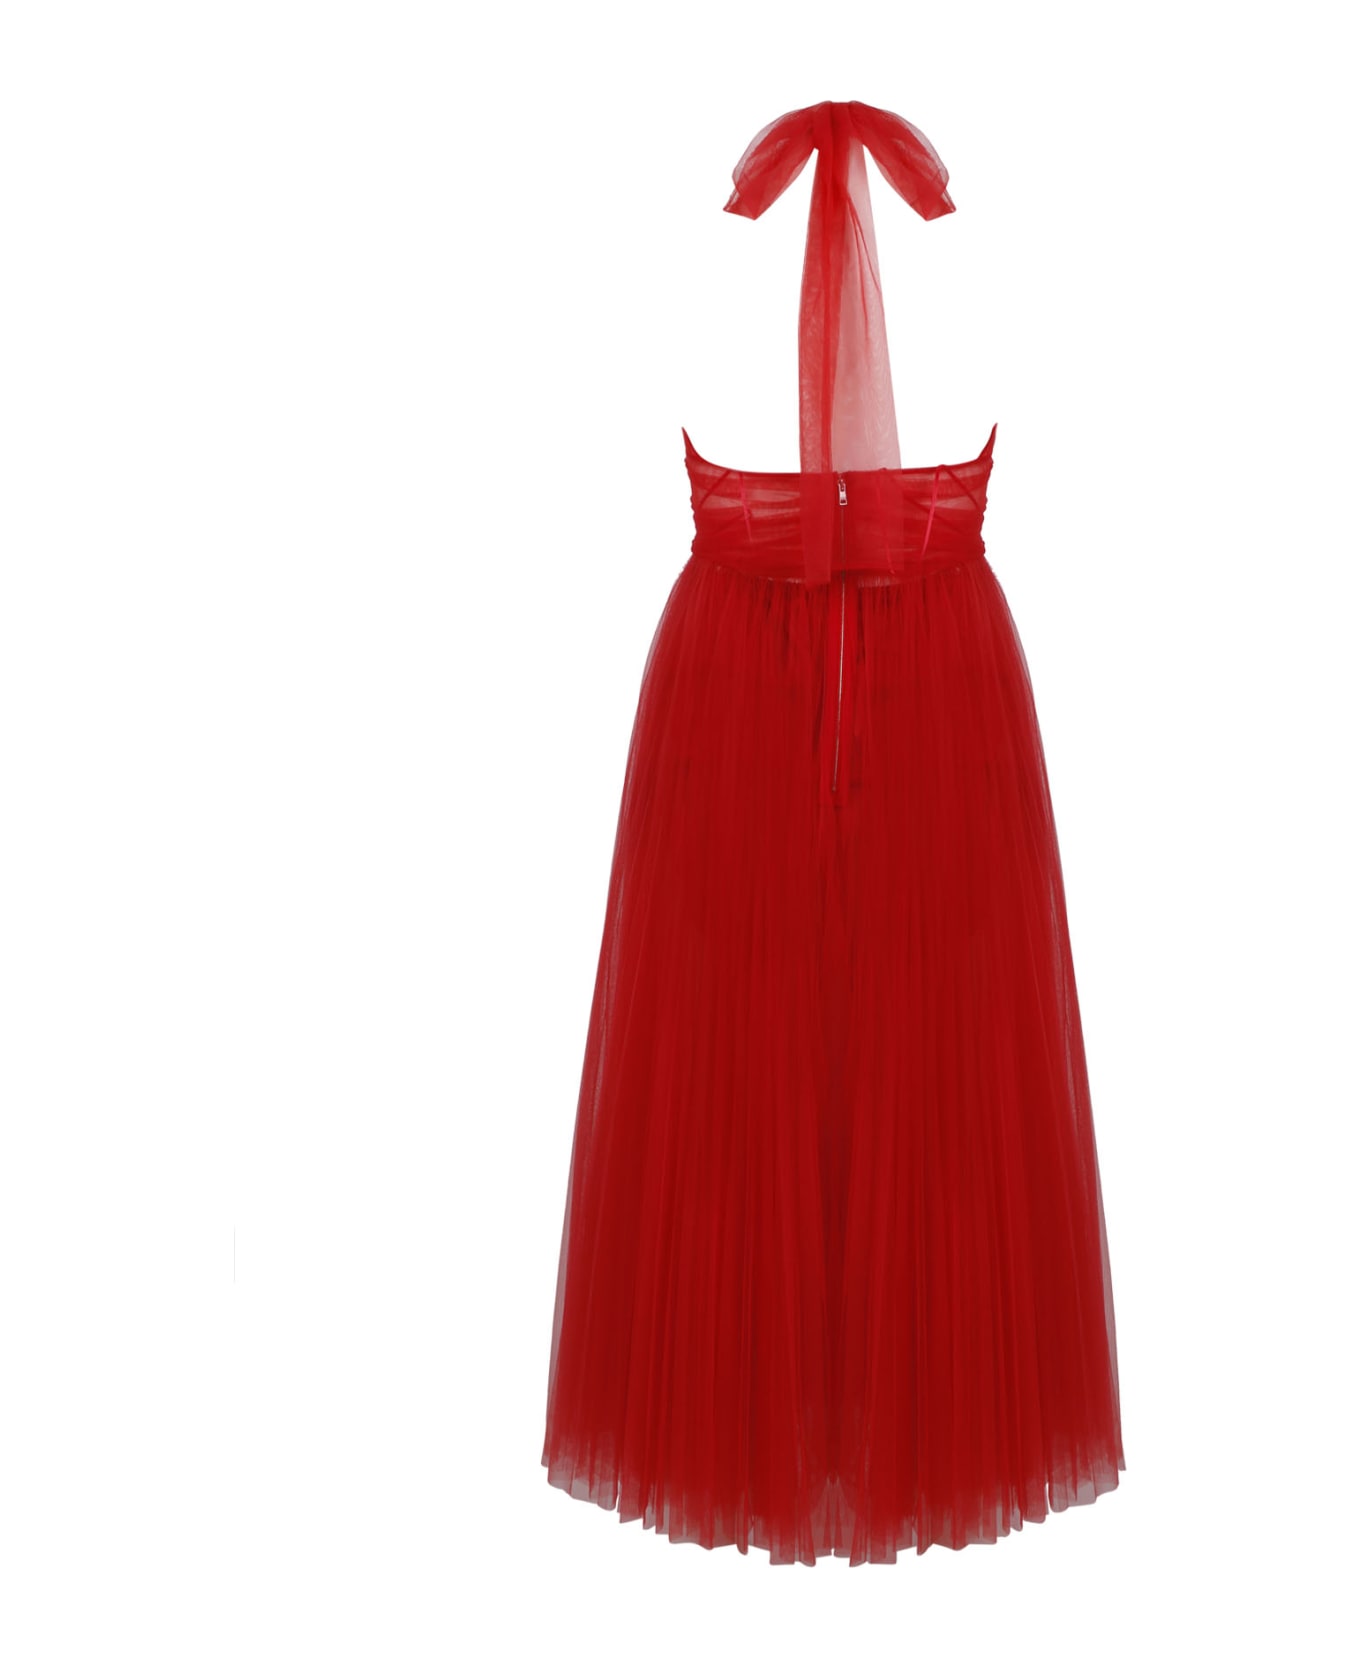 Dolce & Gabbana Pleated Tulle Dress - Red